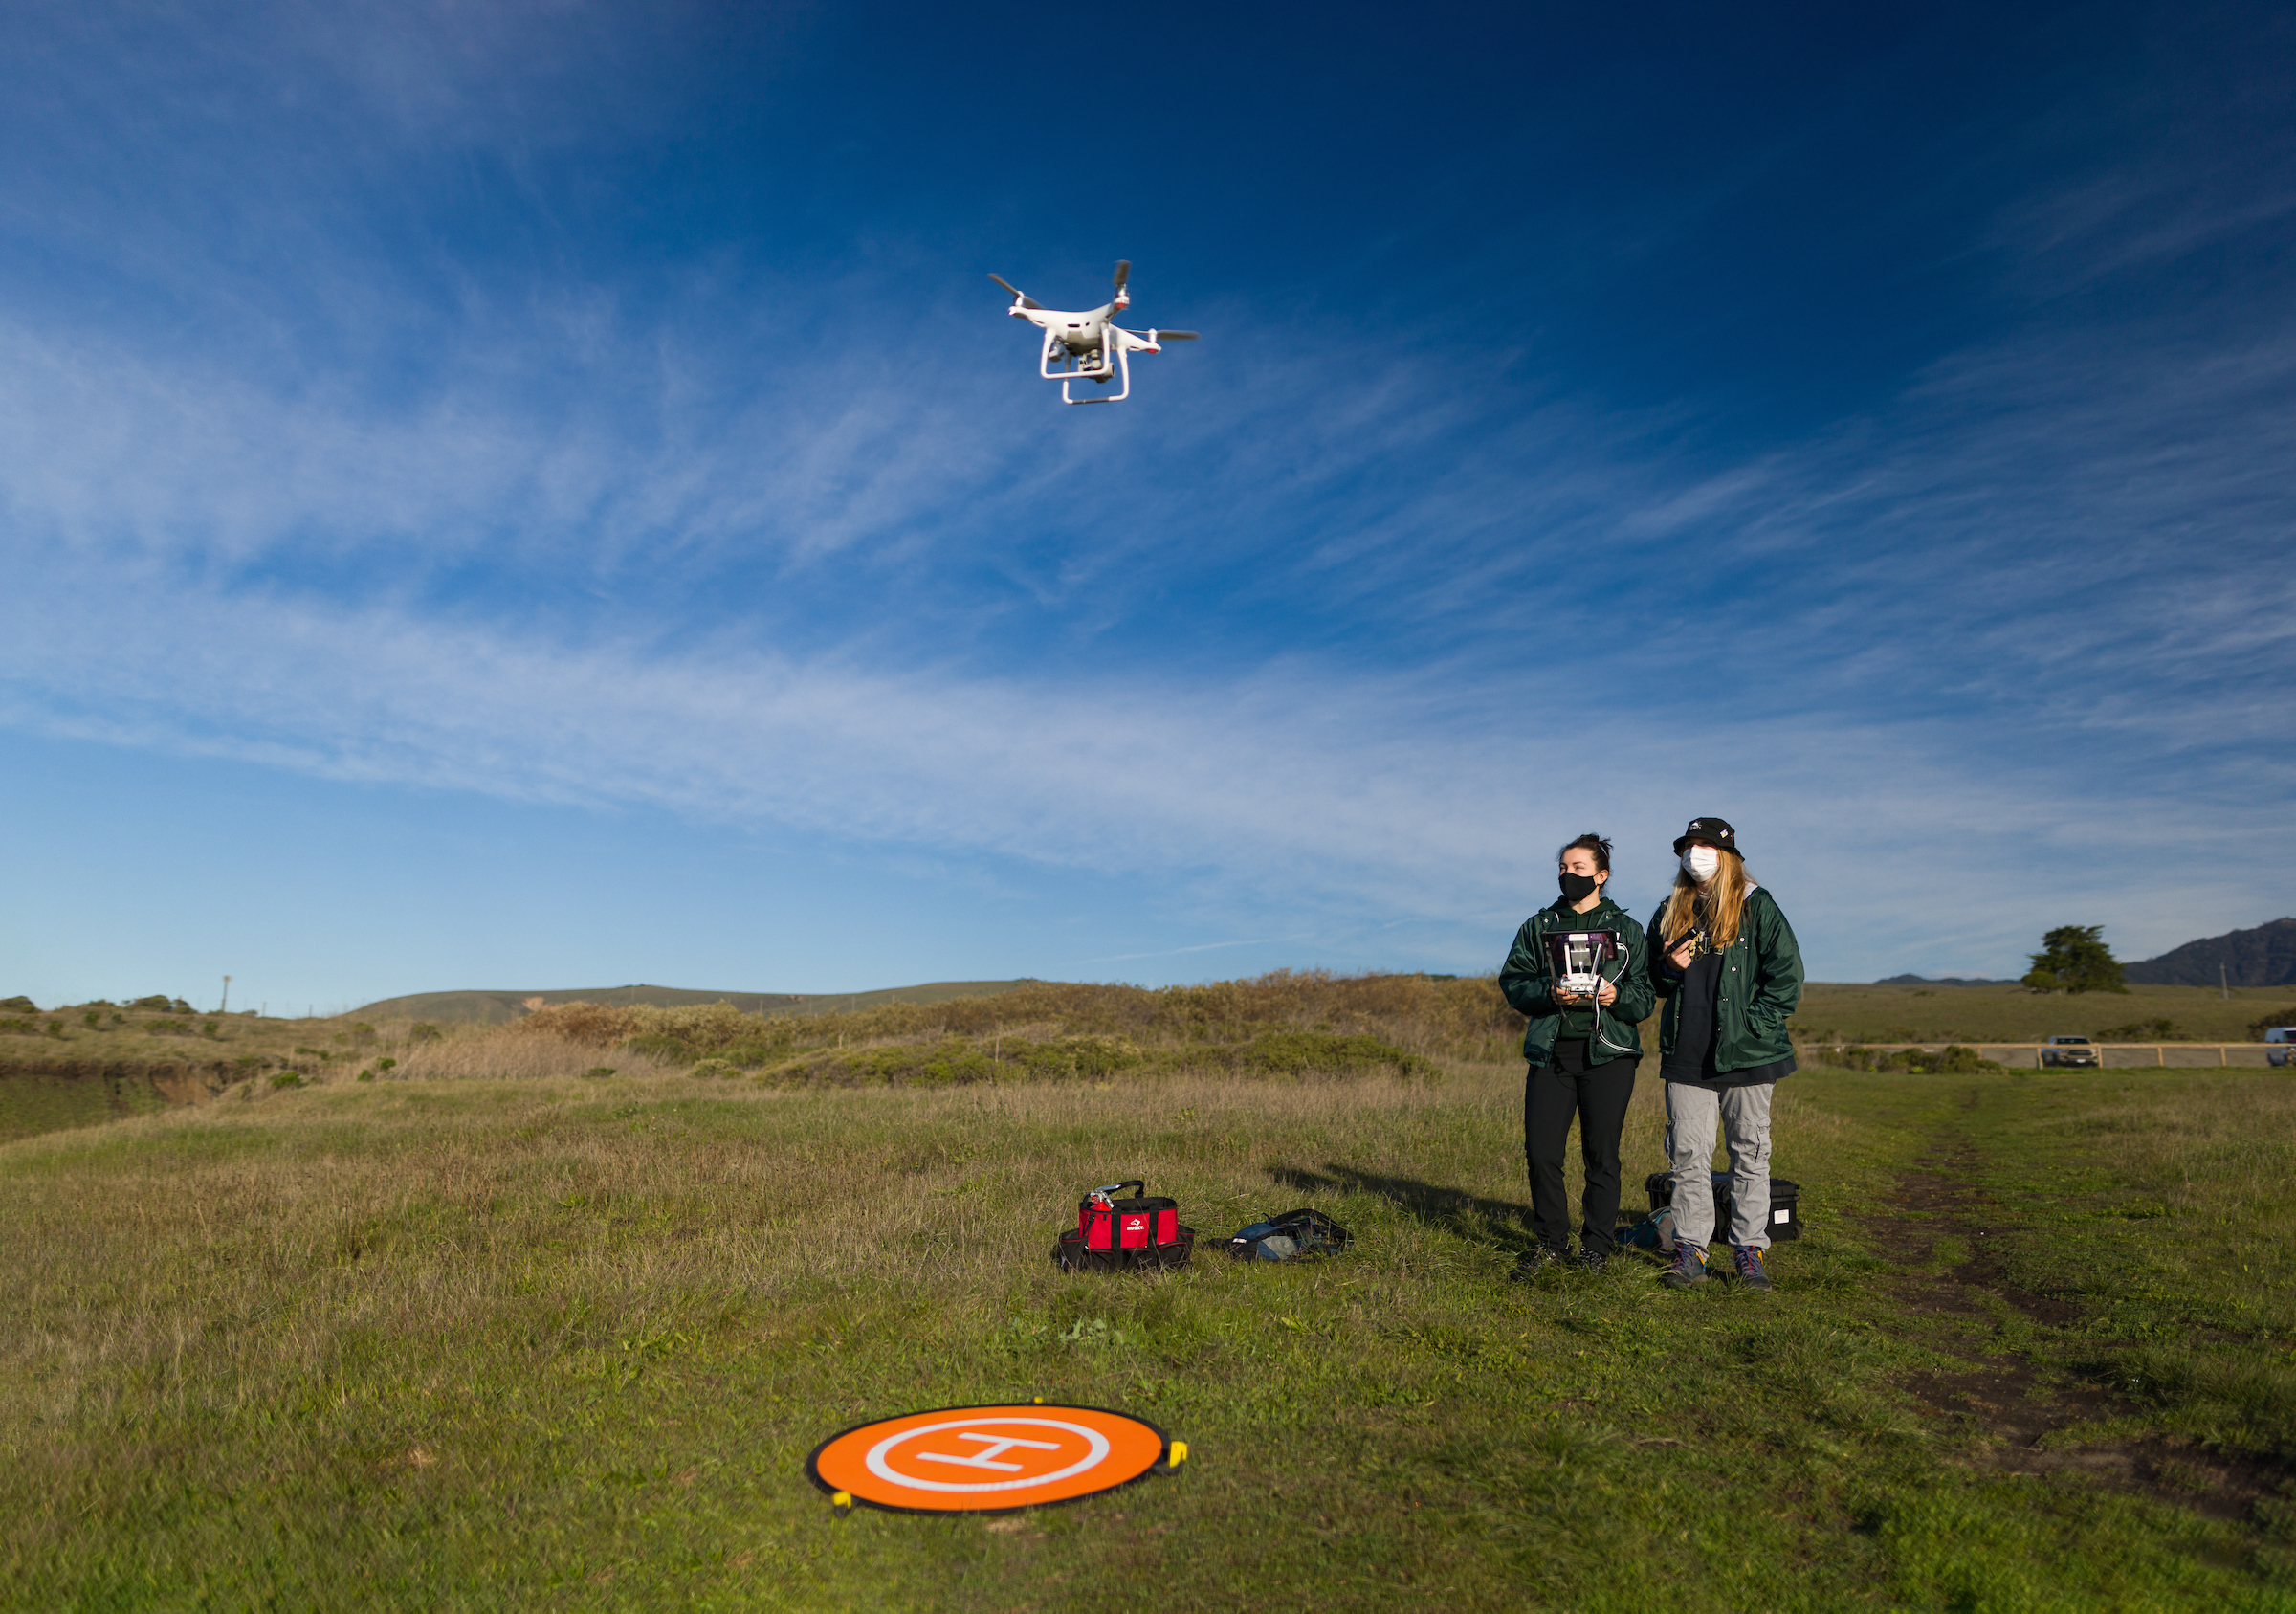 Two women wearing green Cal Poly jackets operate an aerial drone on a grassy bluff. The drone hovers in the foreground.